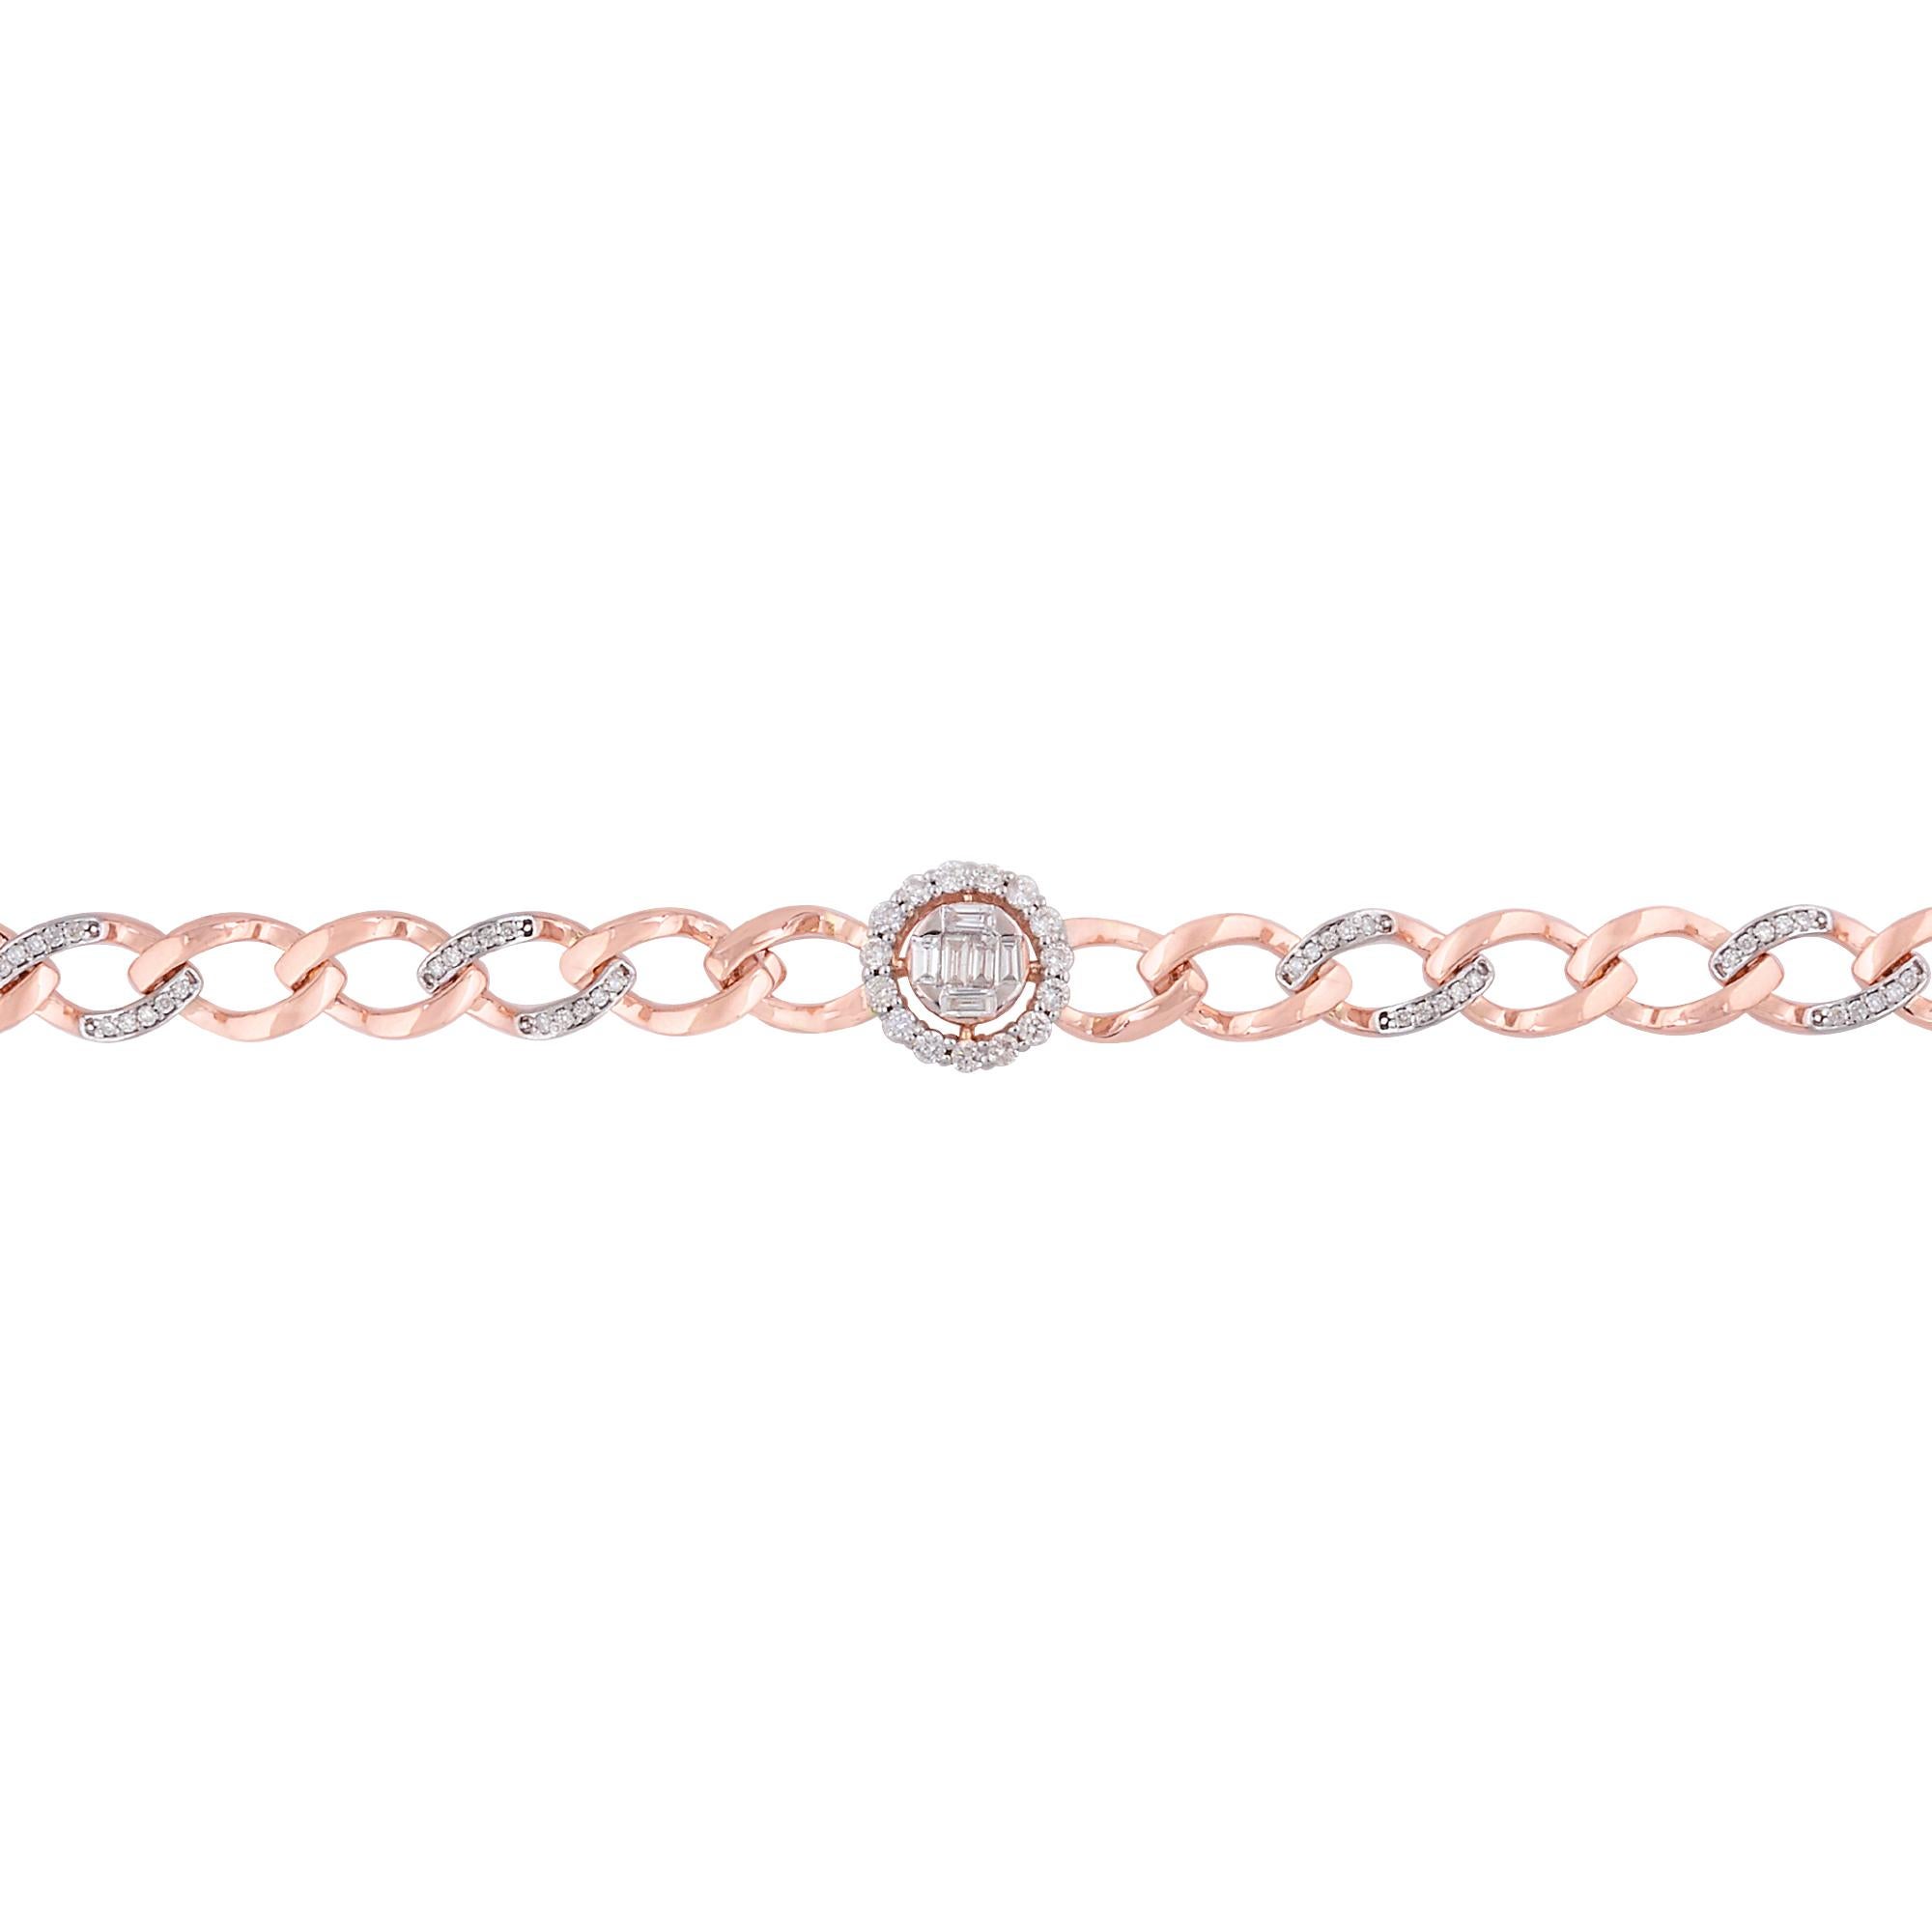 Item Code :- SEBR-4128A
Gross Wt. :- 12.71 gm
18k Rose Gold Wt. :- 12.54 gm
Natural Diamond Wt. :- 0.85 Ct. ( AVERAGE DIAMOND CLARITY SI1-SI2 & COLOR H-I )
Bracelet Length :- 7 Inches Long

✦ Sizing
.....................
We can adjust most items to